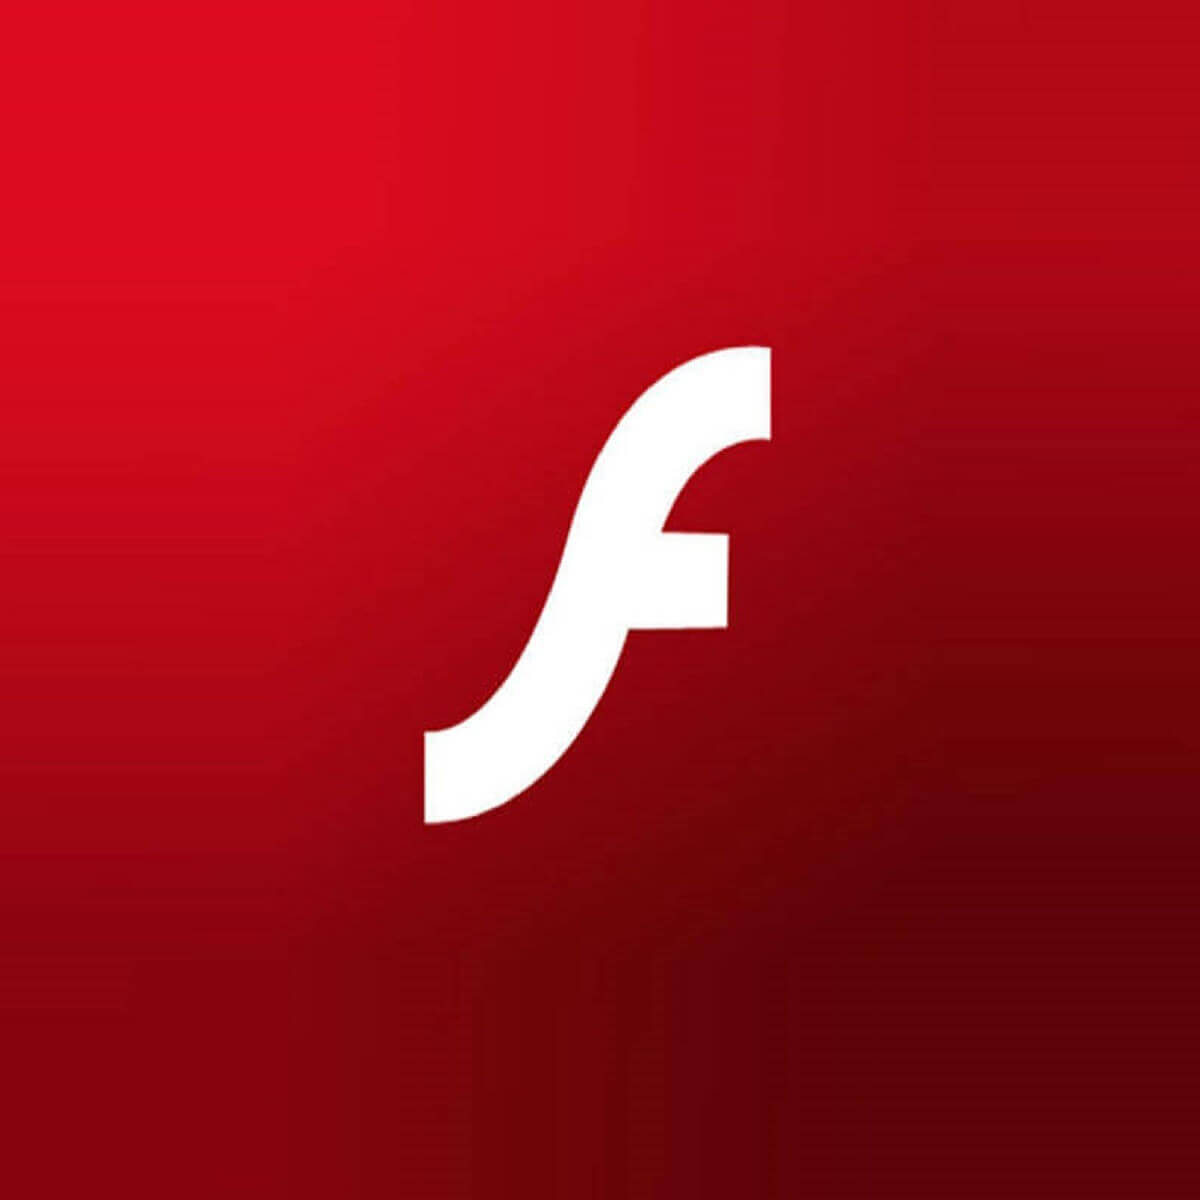 patch tuesday adobe flash vulnerabilities